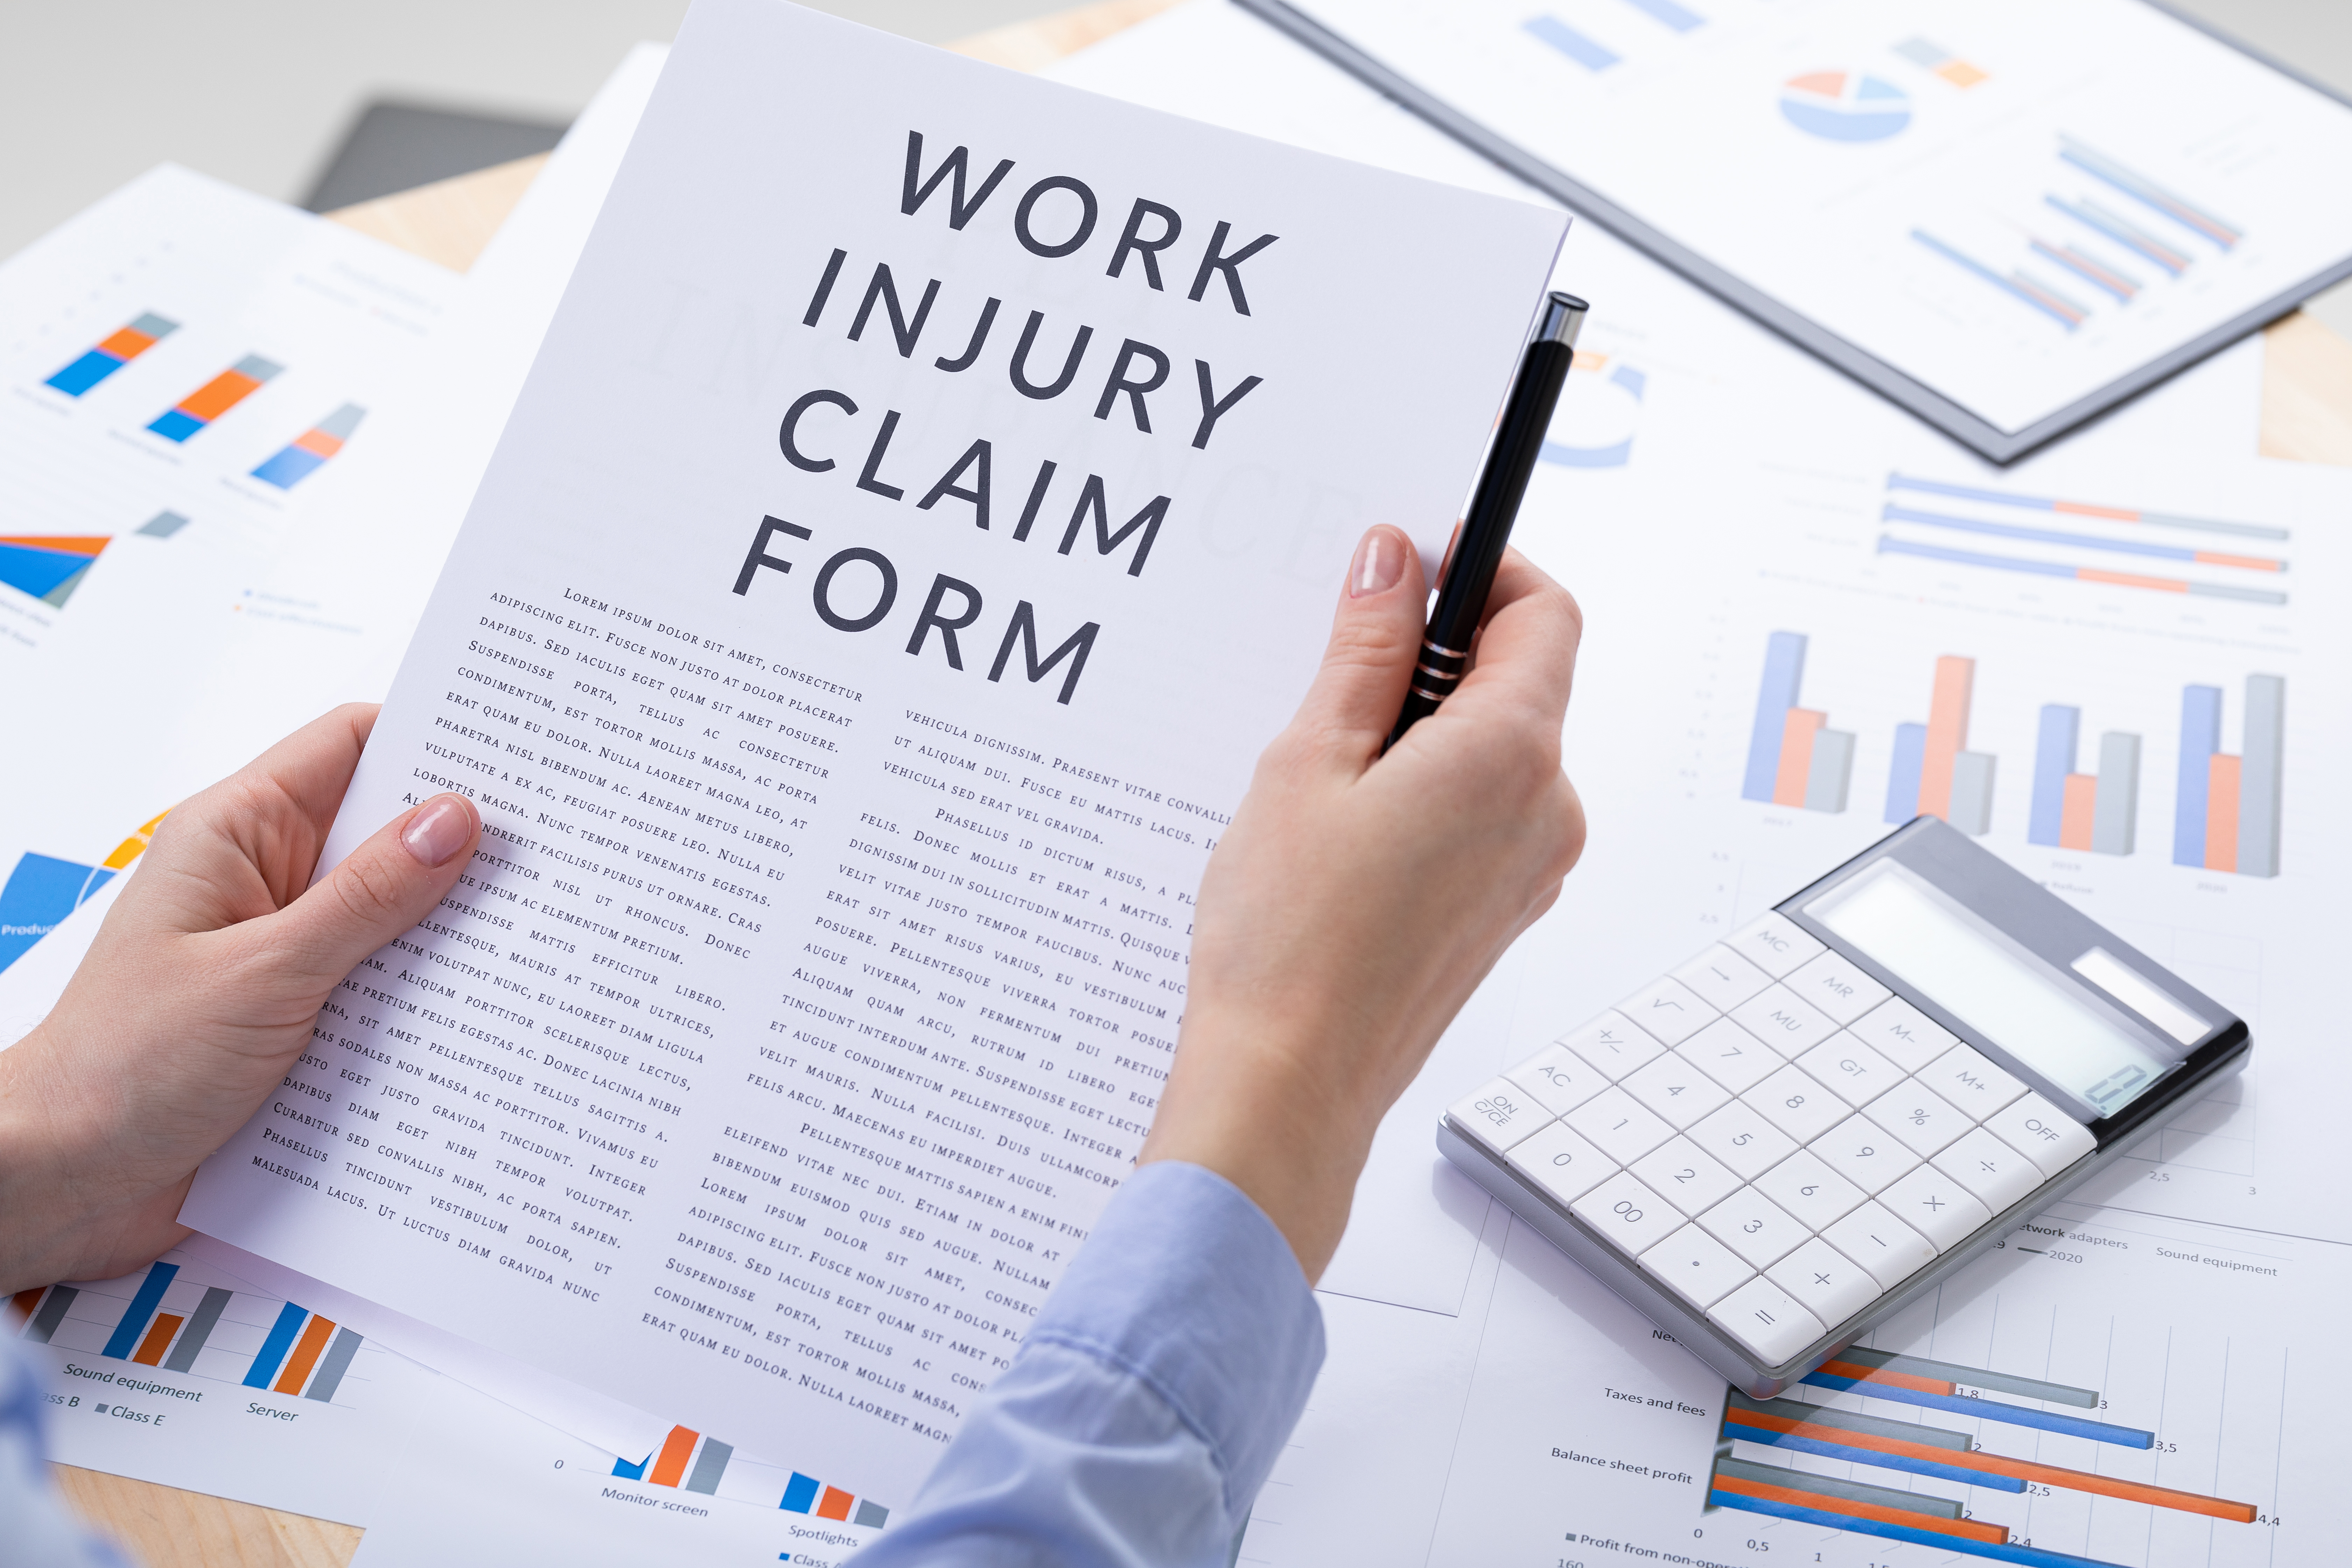 Steps to Take When You’re Injured at Work